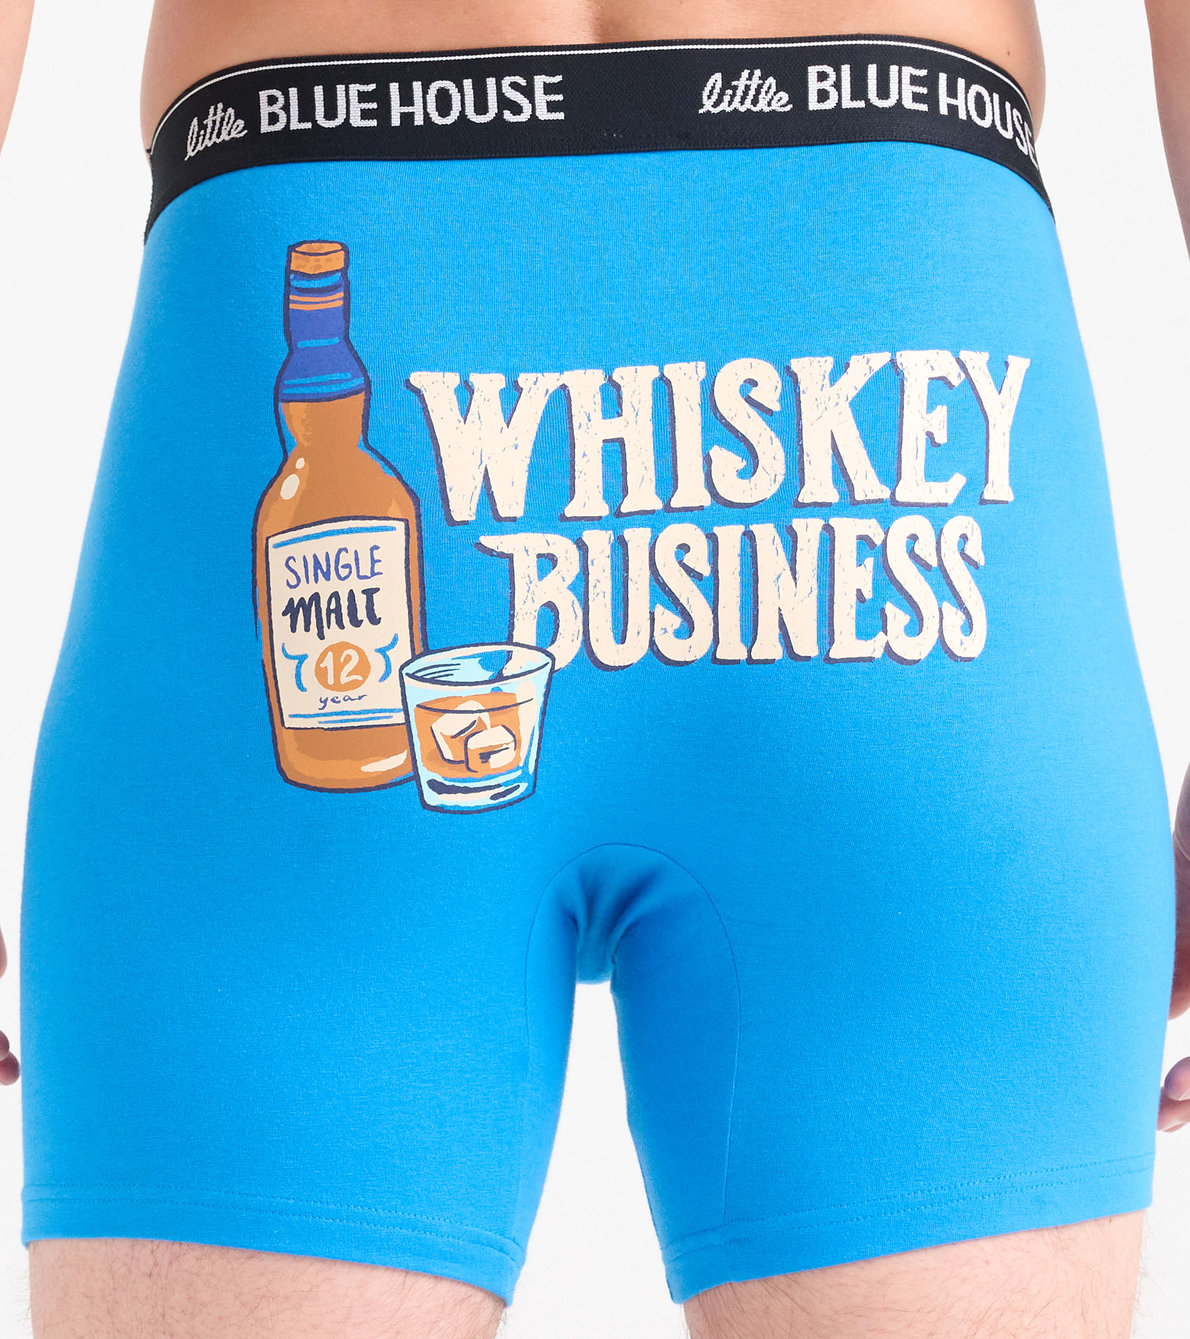 View larger image of Whiskey Business Men's Boxer Briefs